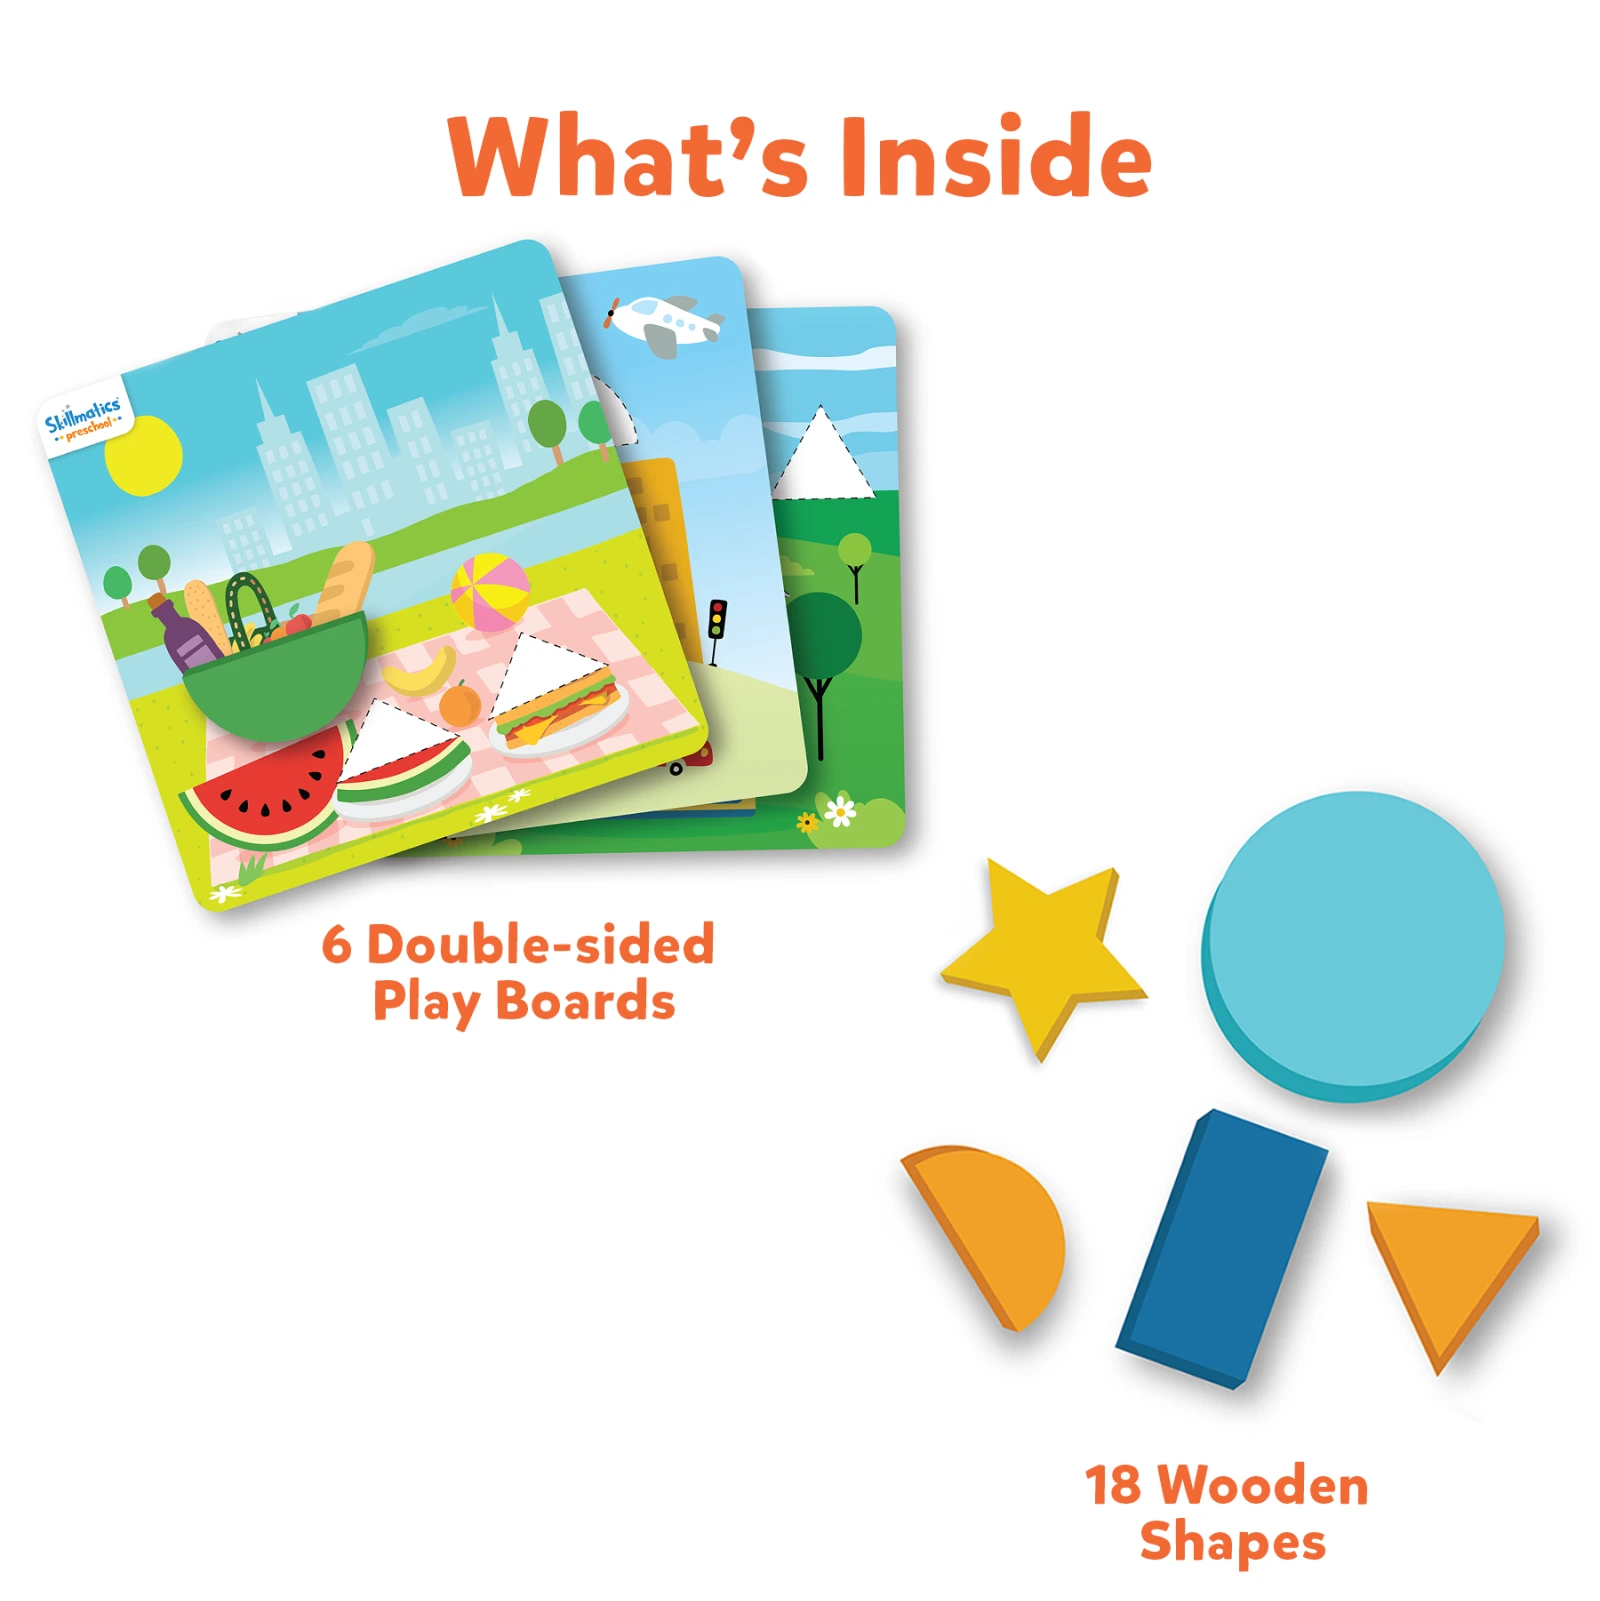 Shape Scapes | Educational Wooden Game (ages 3-6)